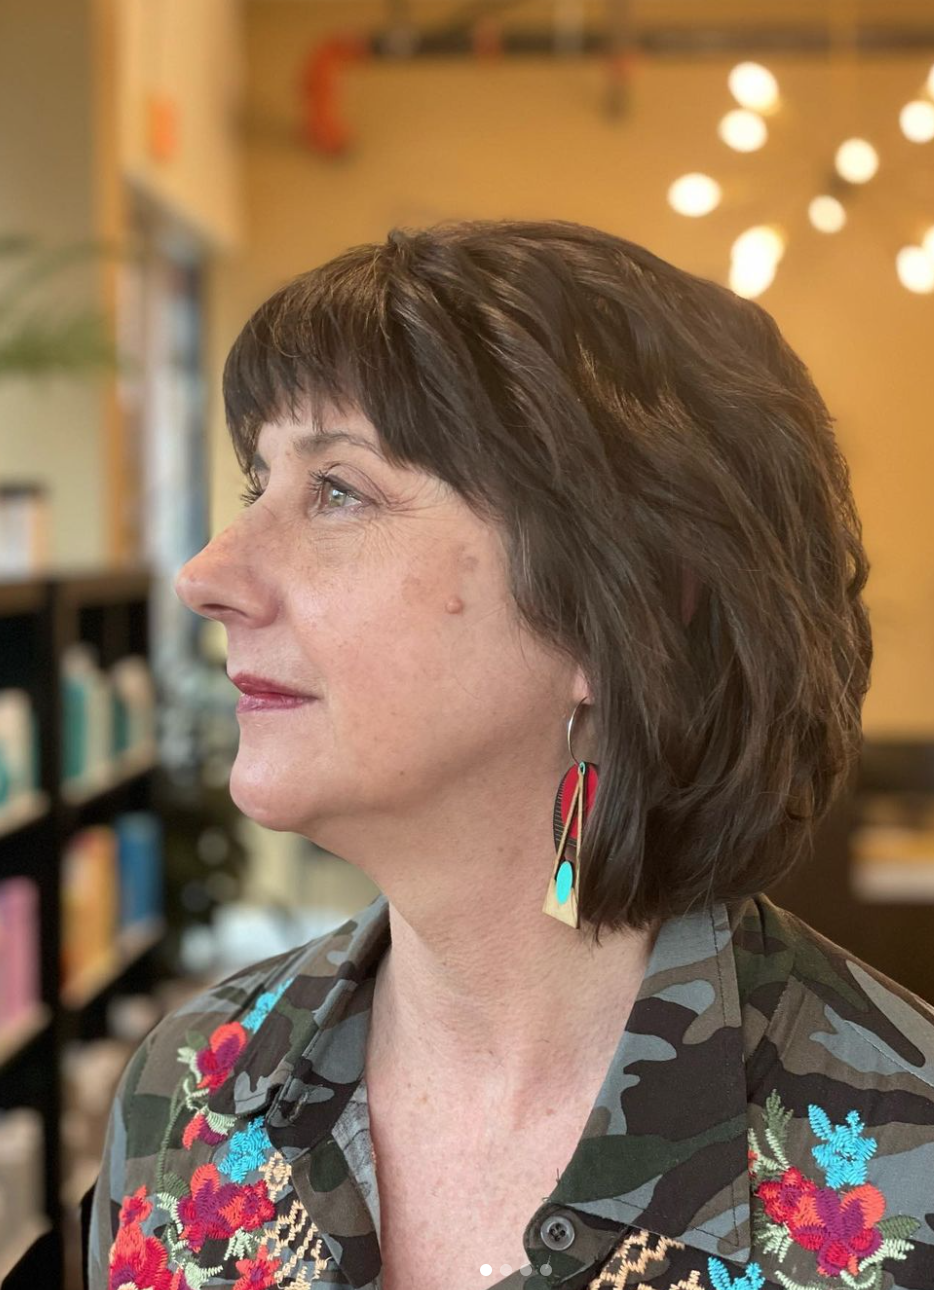 A woman with long colorful earrings looking up.